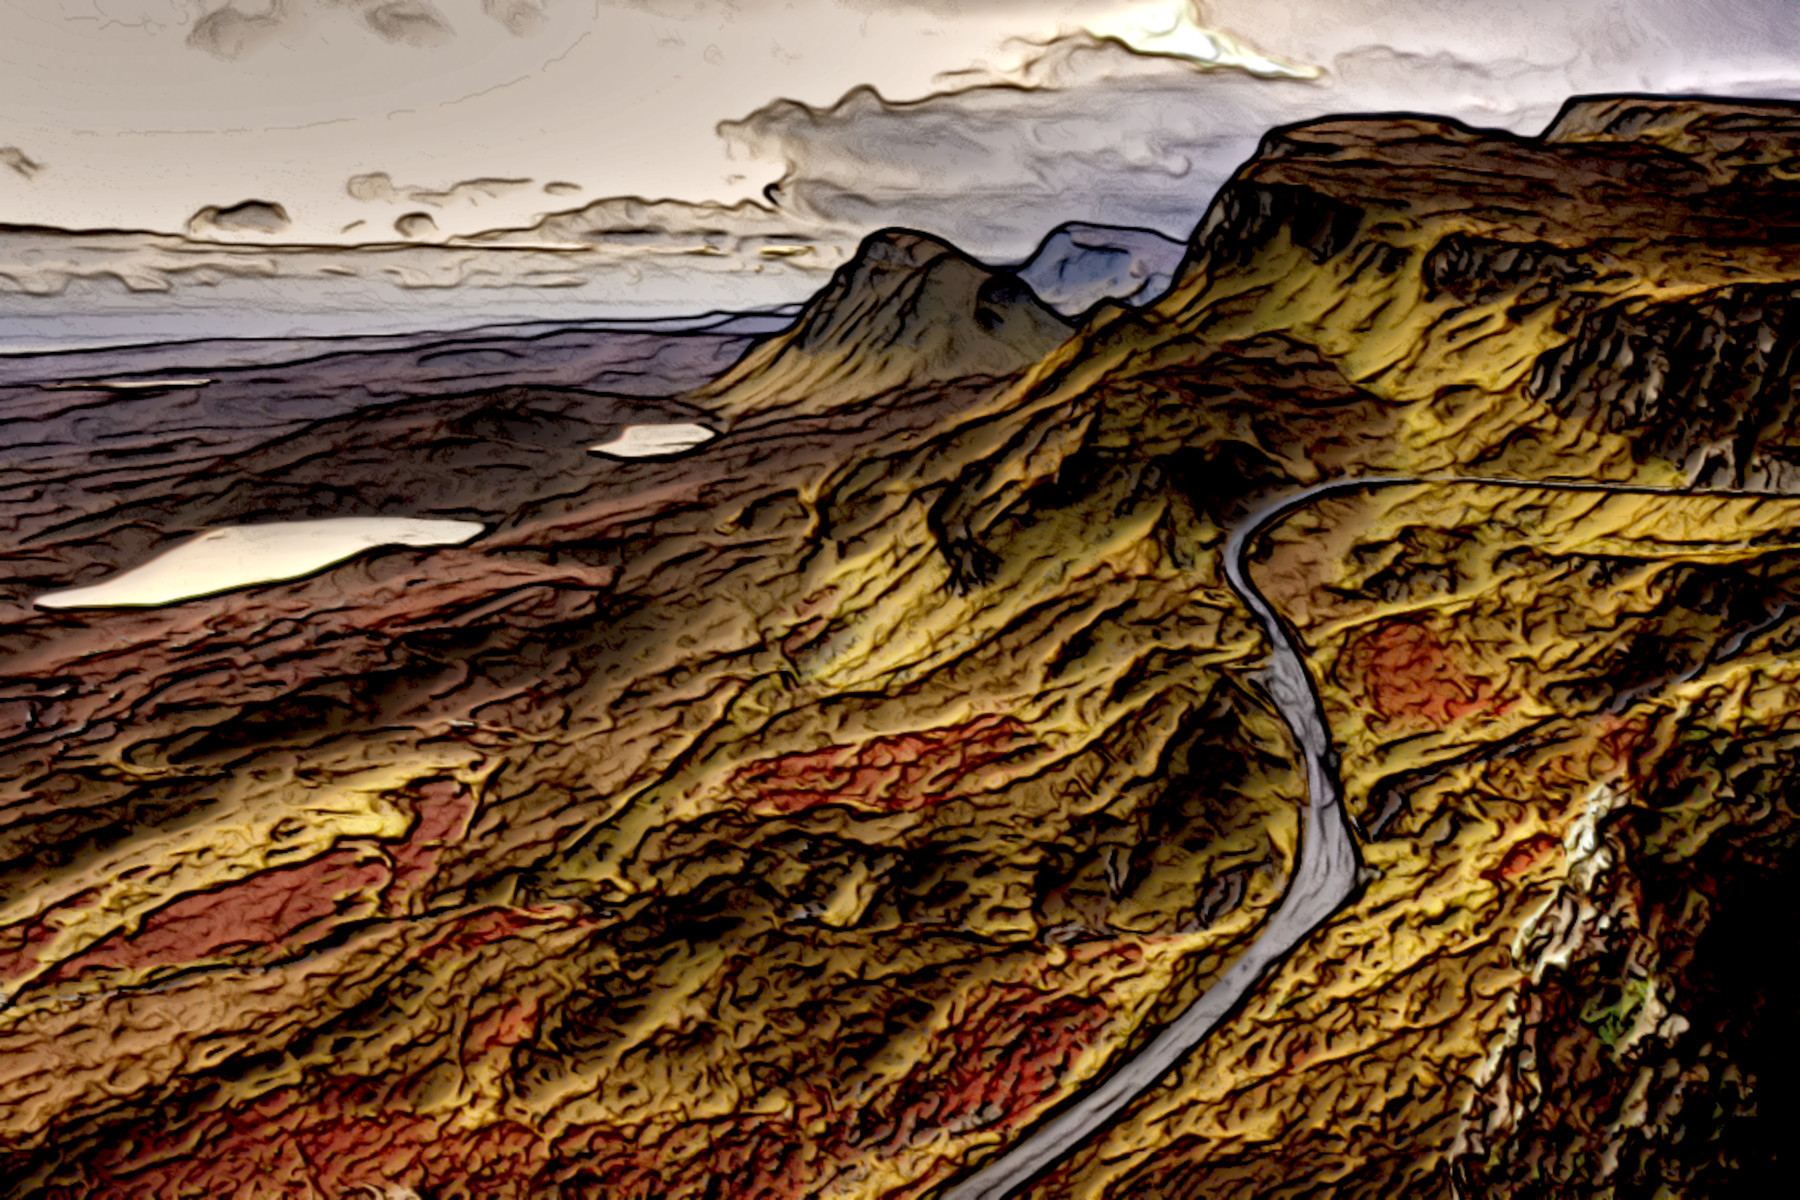 2021-04-27 18-17-56 landscape-nature-mountains-road-39391 with effect B (MeanCurvature+Neon), option colours (strong texture) and edges=large.jpeg